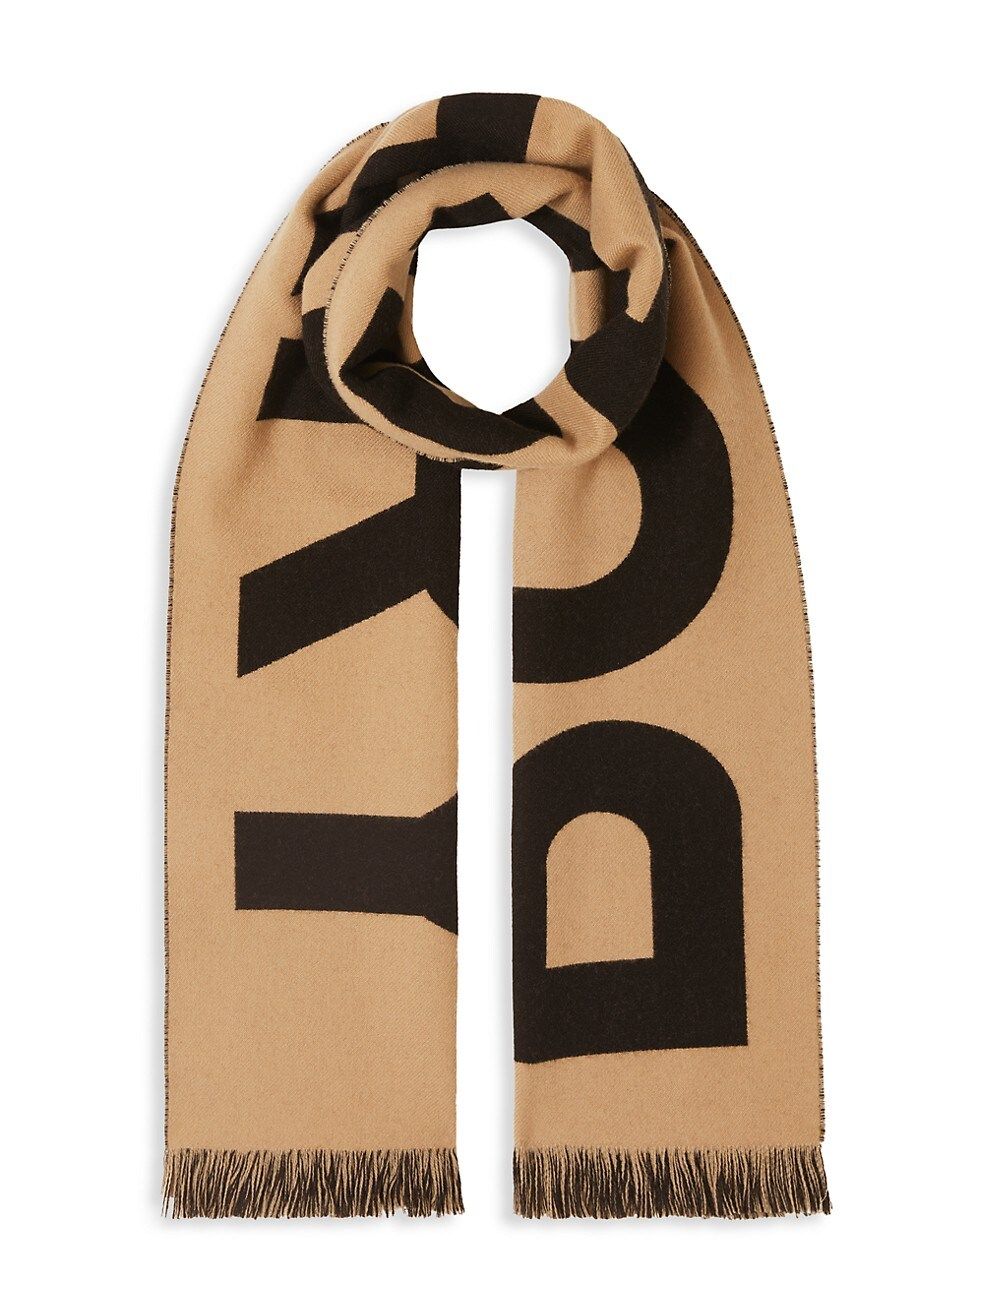 Archive Wool Scarf | Saks Fifth Avenue